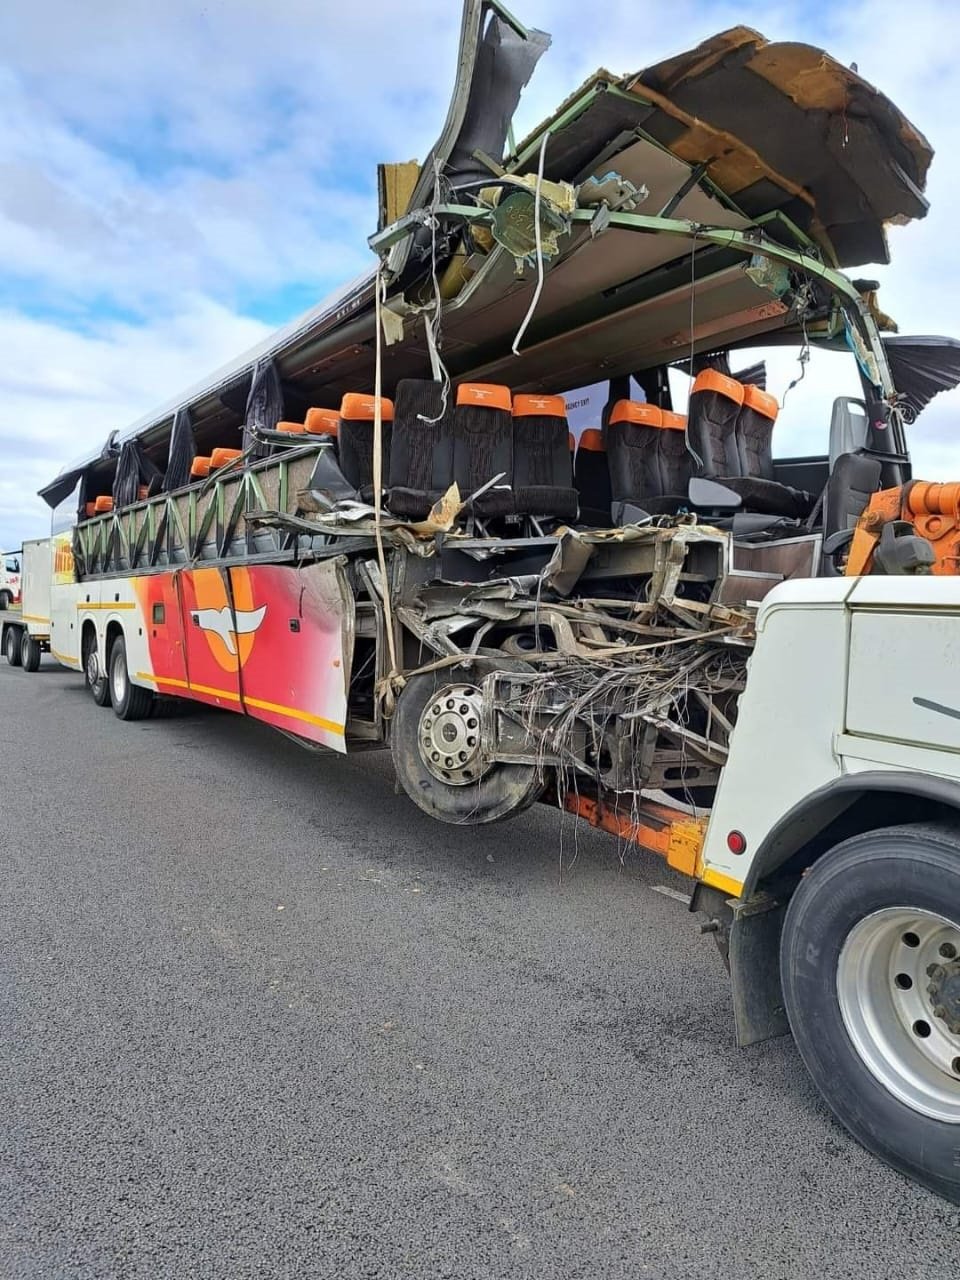 6 killed and at least 30 injured in bus collision near Mossel Bay